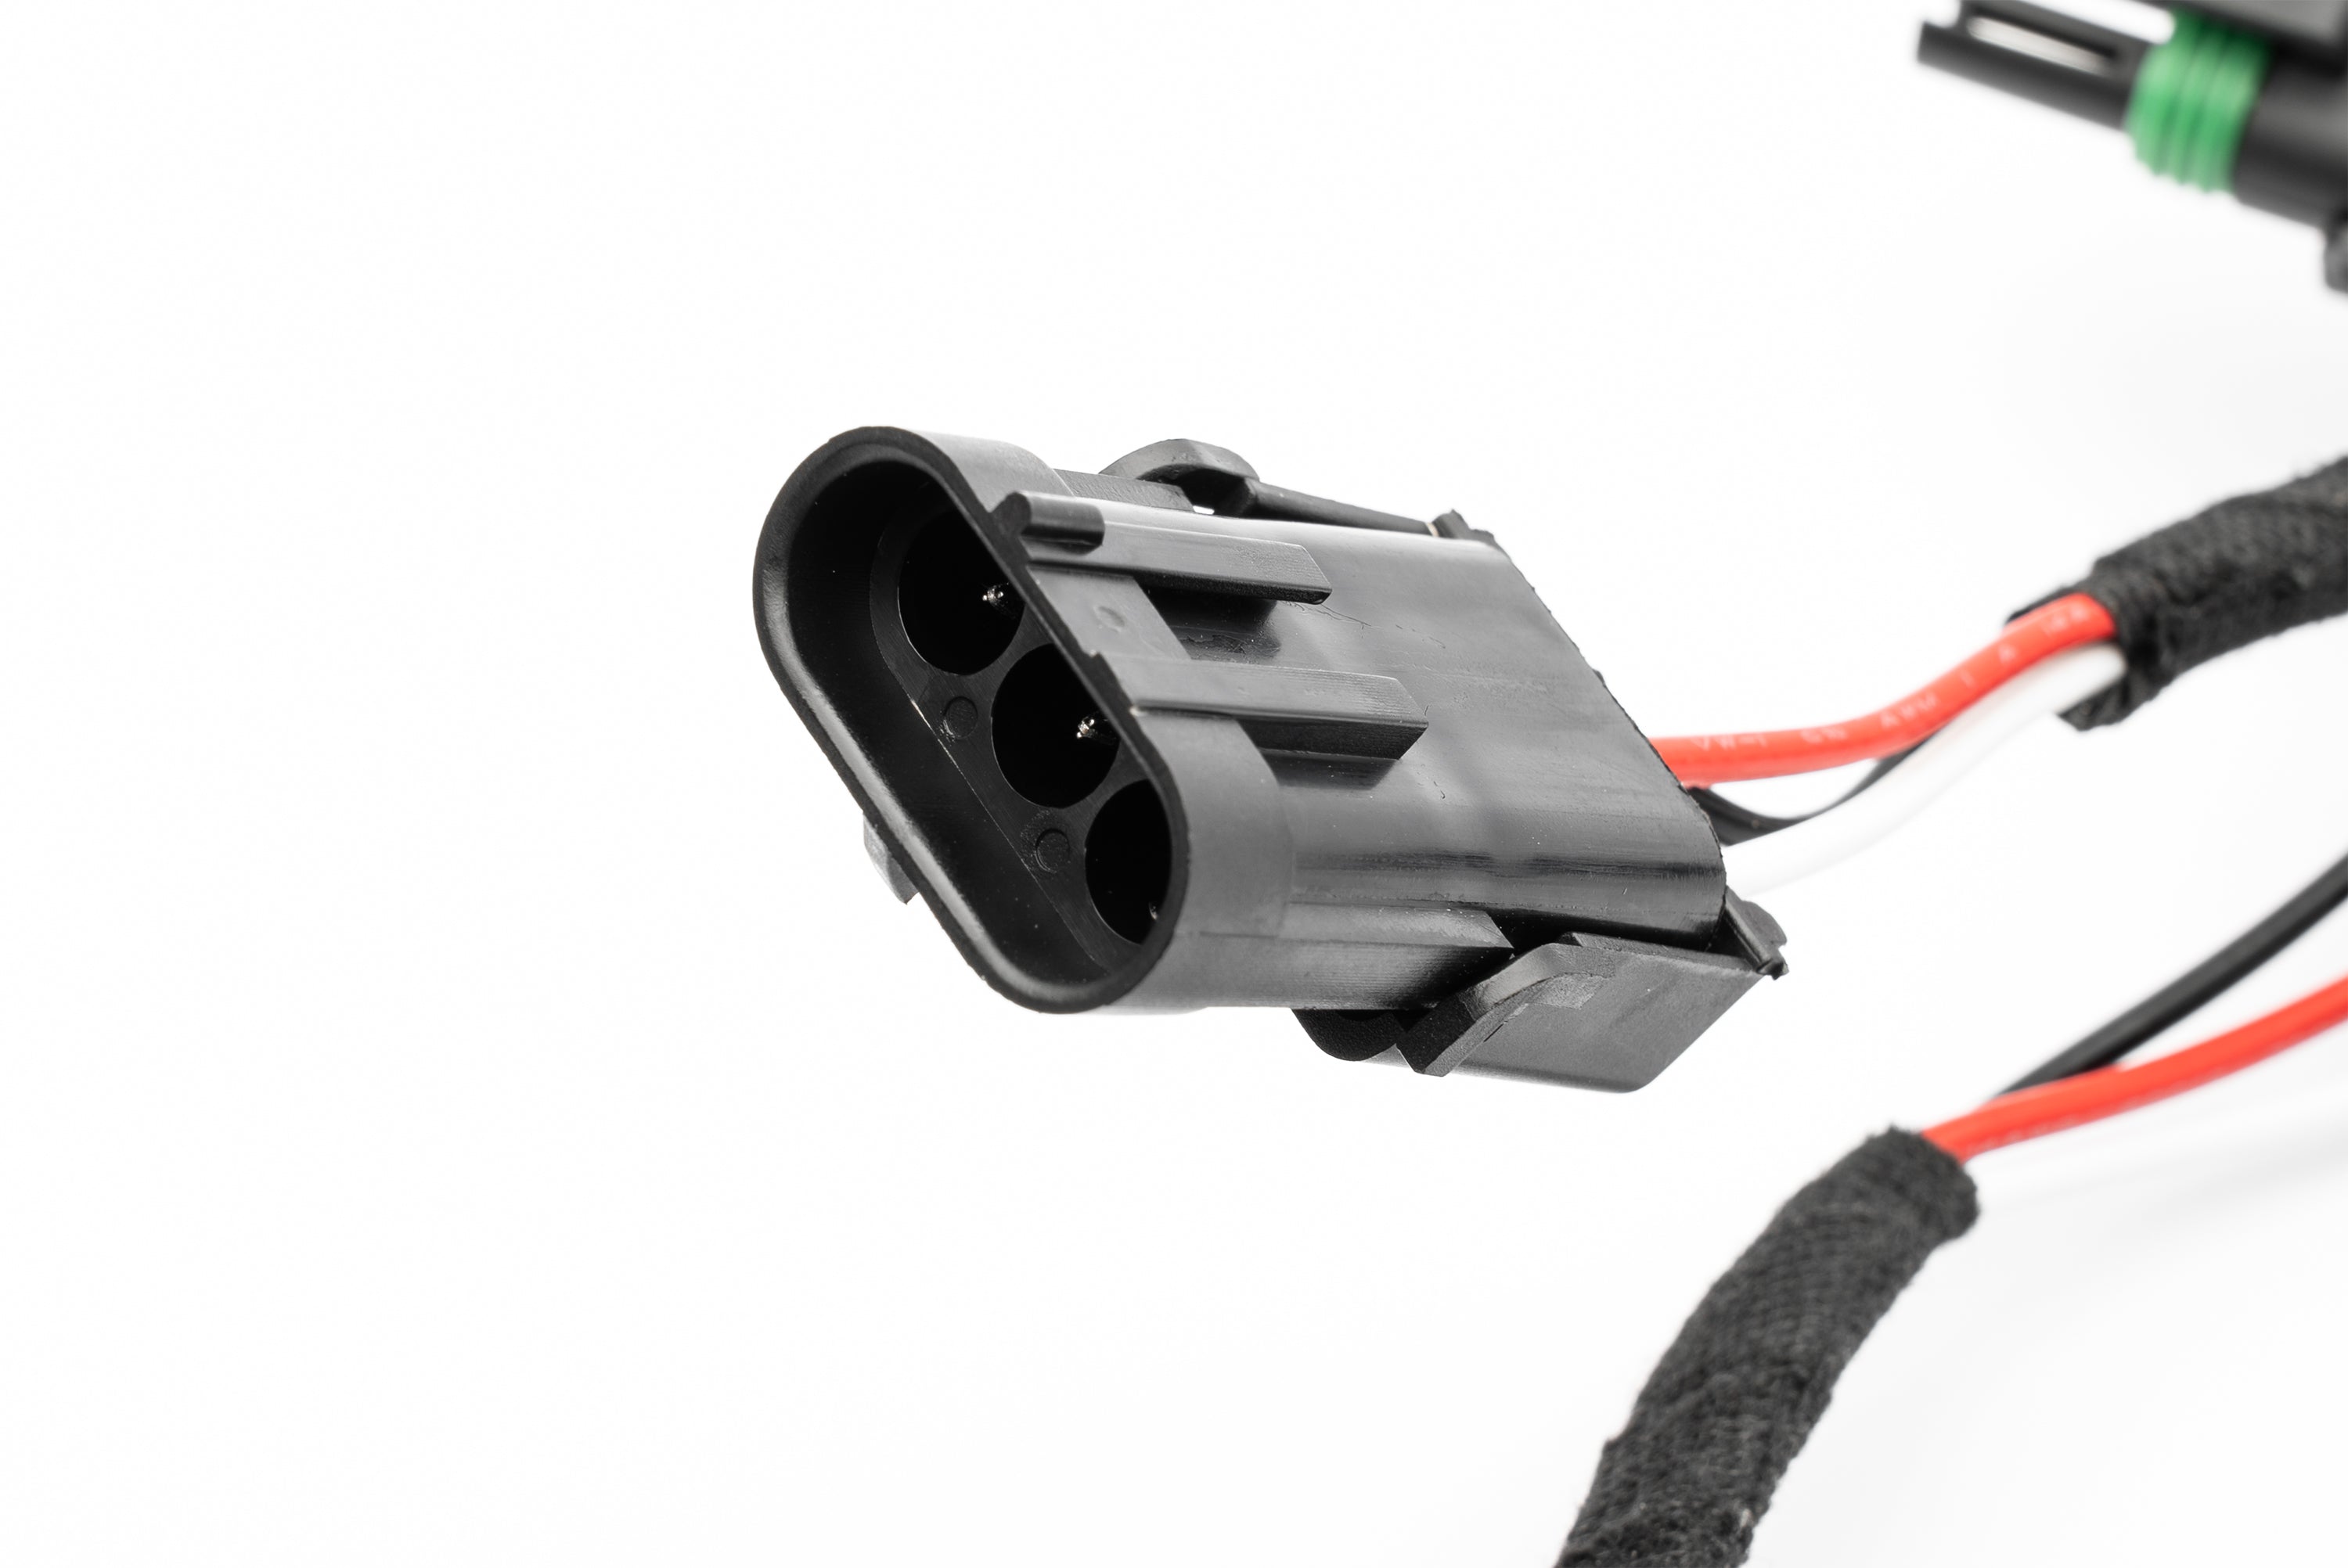 6X 3 Pole WP Connector Harness Splitter add on - SPV Harness System (Works with MANY vehicles, See Details)